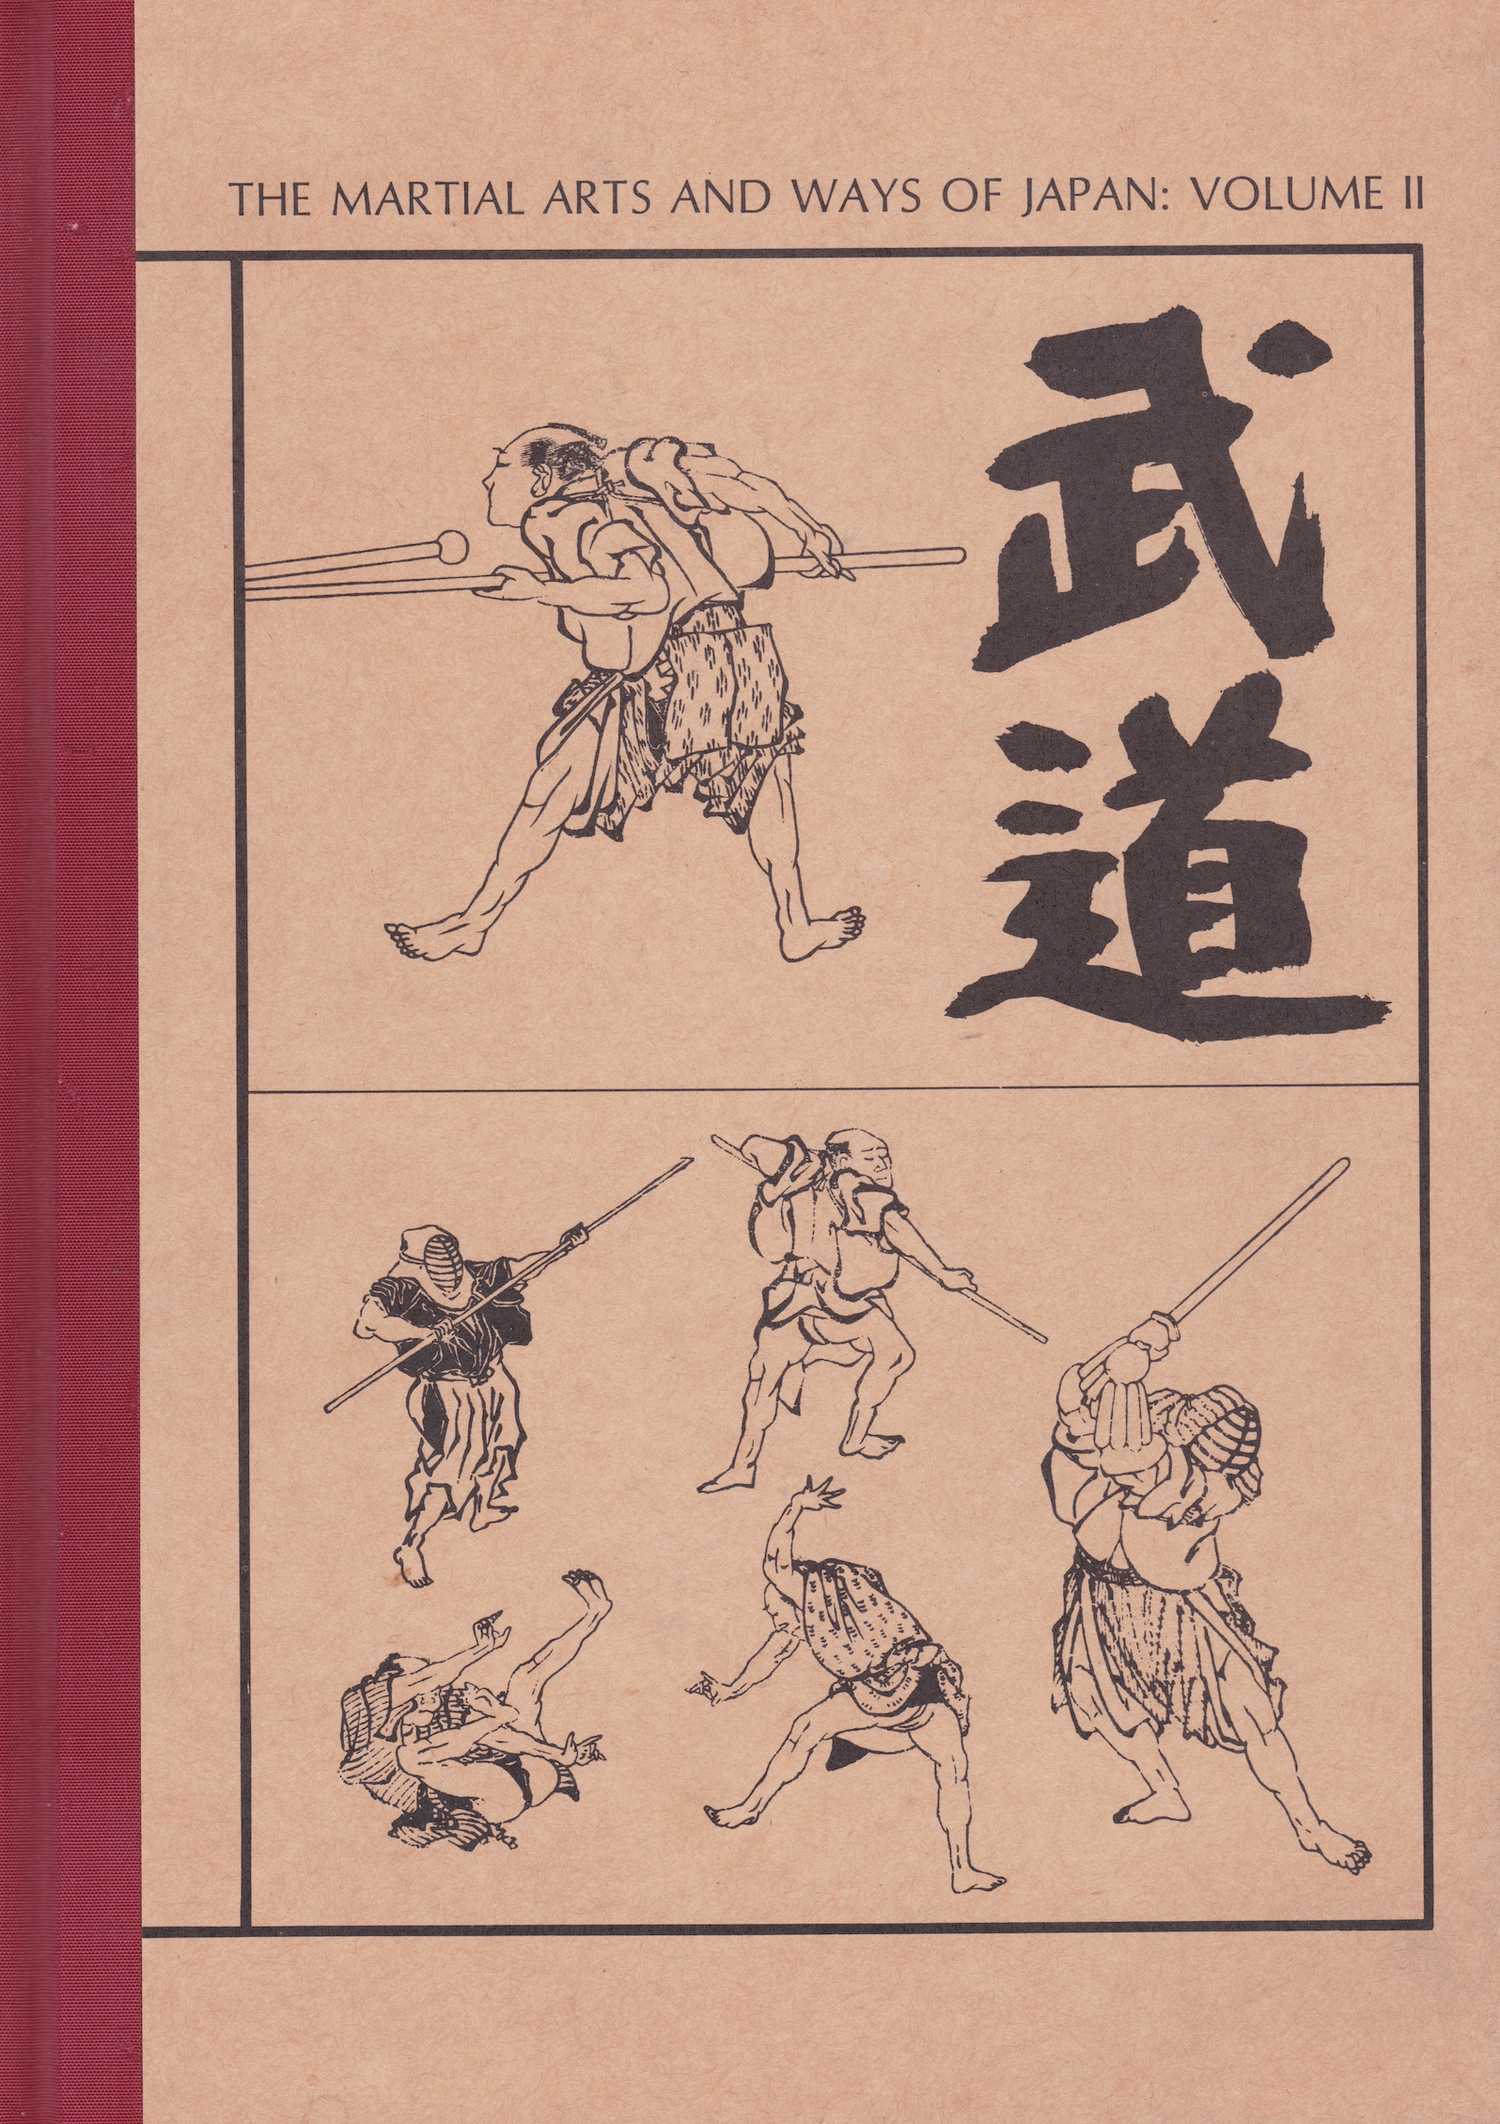 Classical Budo: The Martial Arts and Ways of Japan, Vol. 2 Book by Donn Draeger (Hardcover) (Preowned)